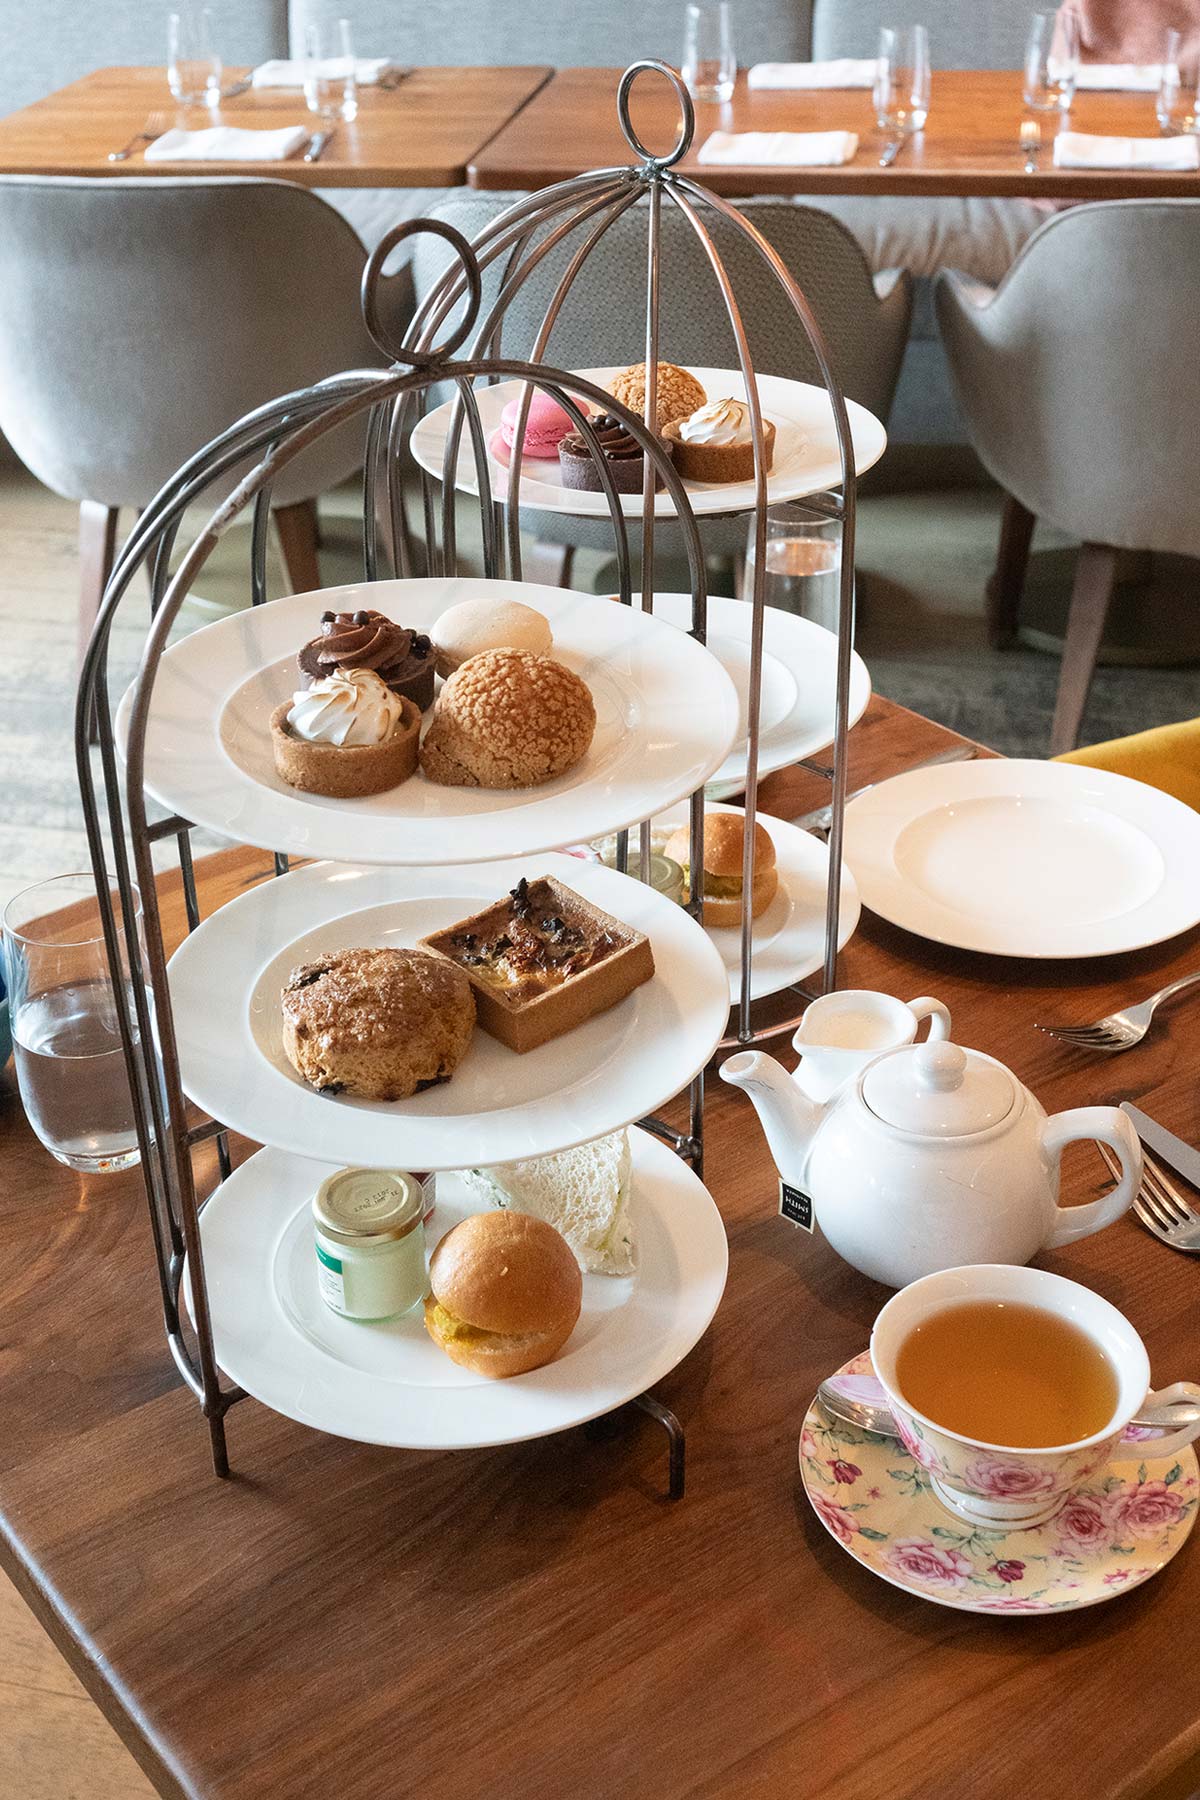 Three-tiered trays of afternoon tea courses.